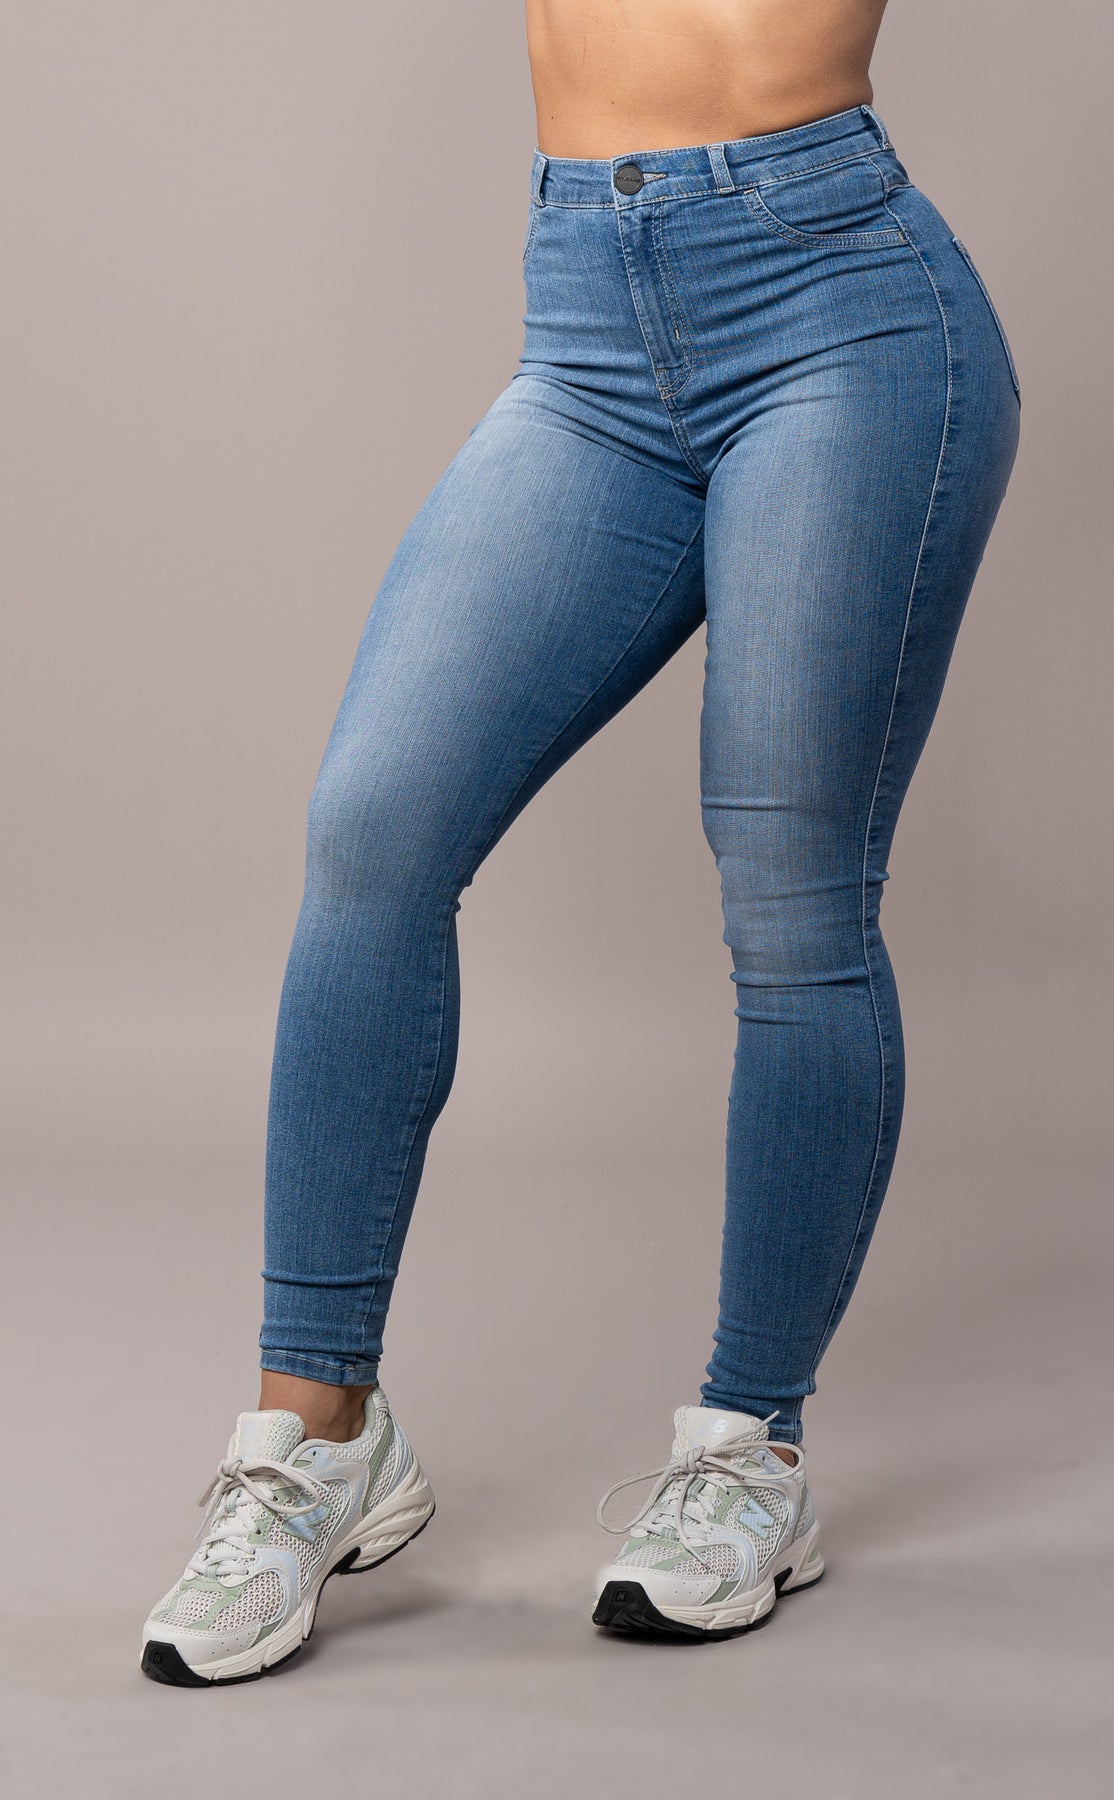 Designer High Waisted Blue Rhinestone Jeans For Women Shiny Flared Jeans  Trousers For Ladies For Summer Casual Style From Secondmoon, $54.67